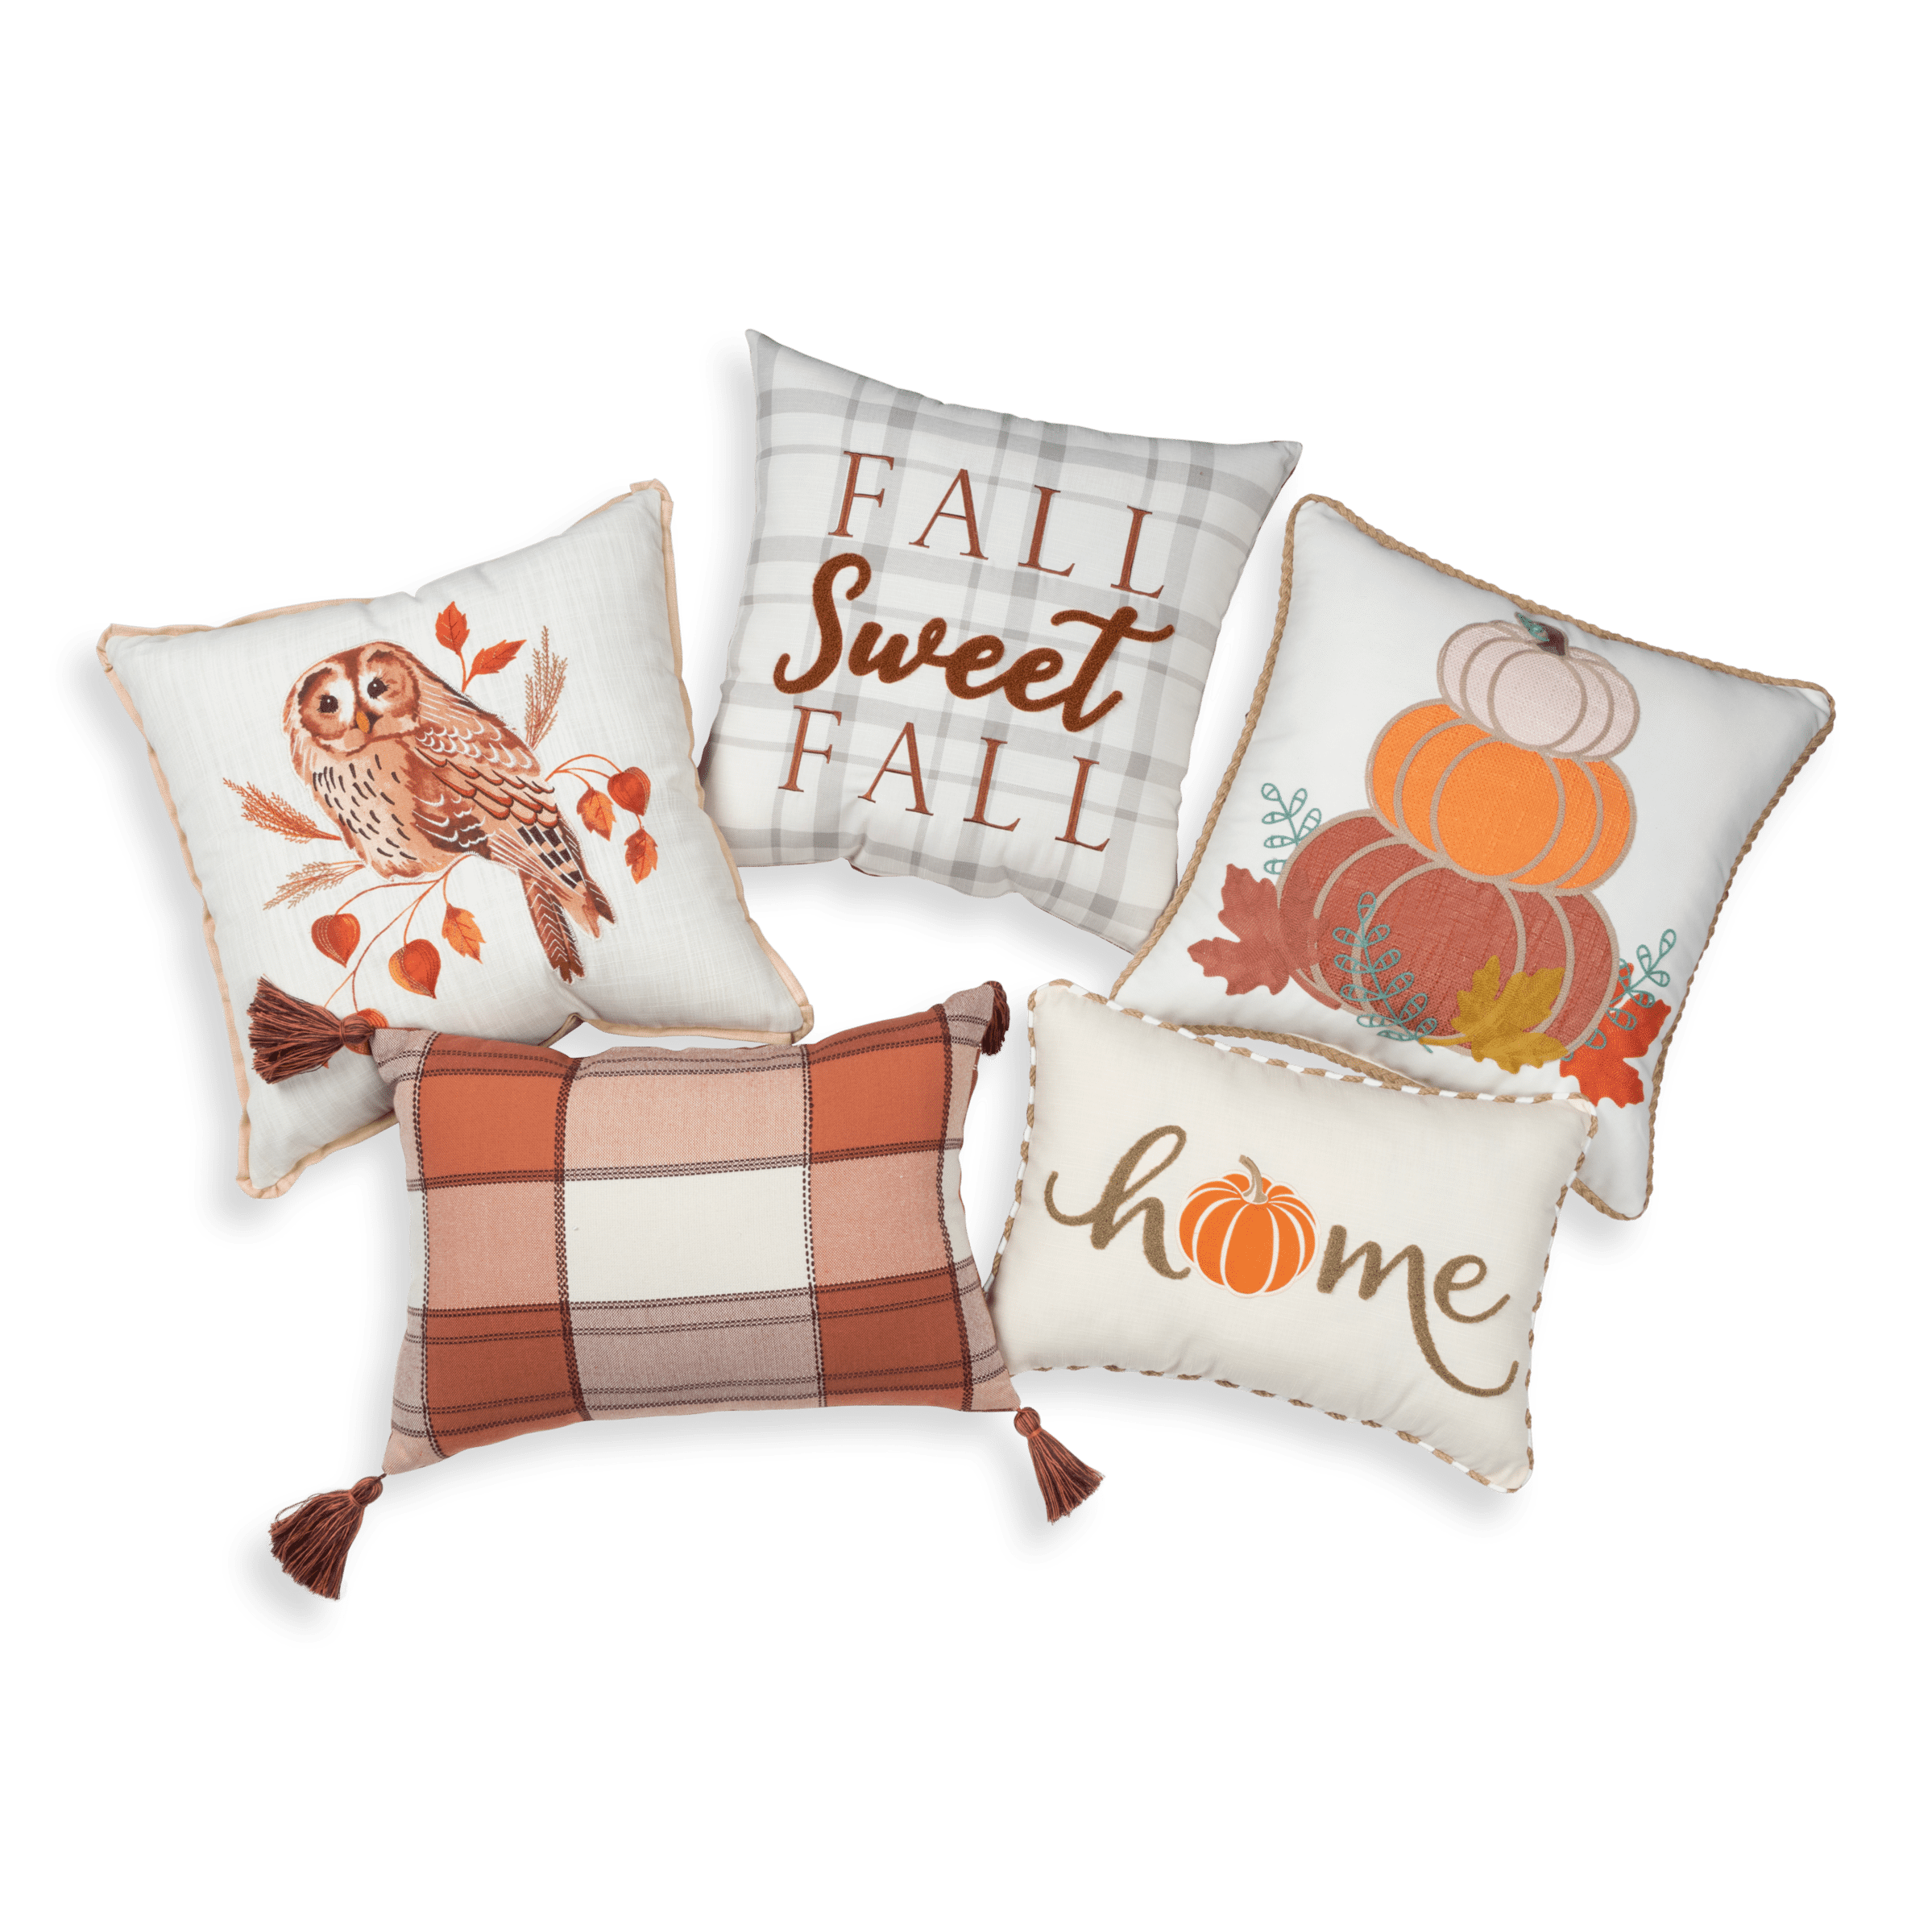 Better Homes & Gardens Fall Sweet Fall Outdoor Throw Pillow, 20 x 20  Square, Multi-Color Plaid 